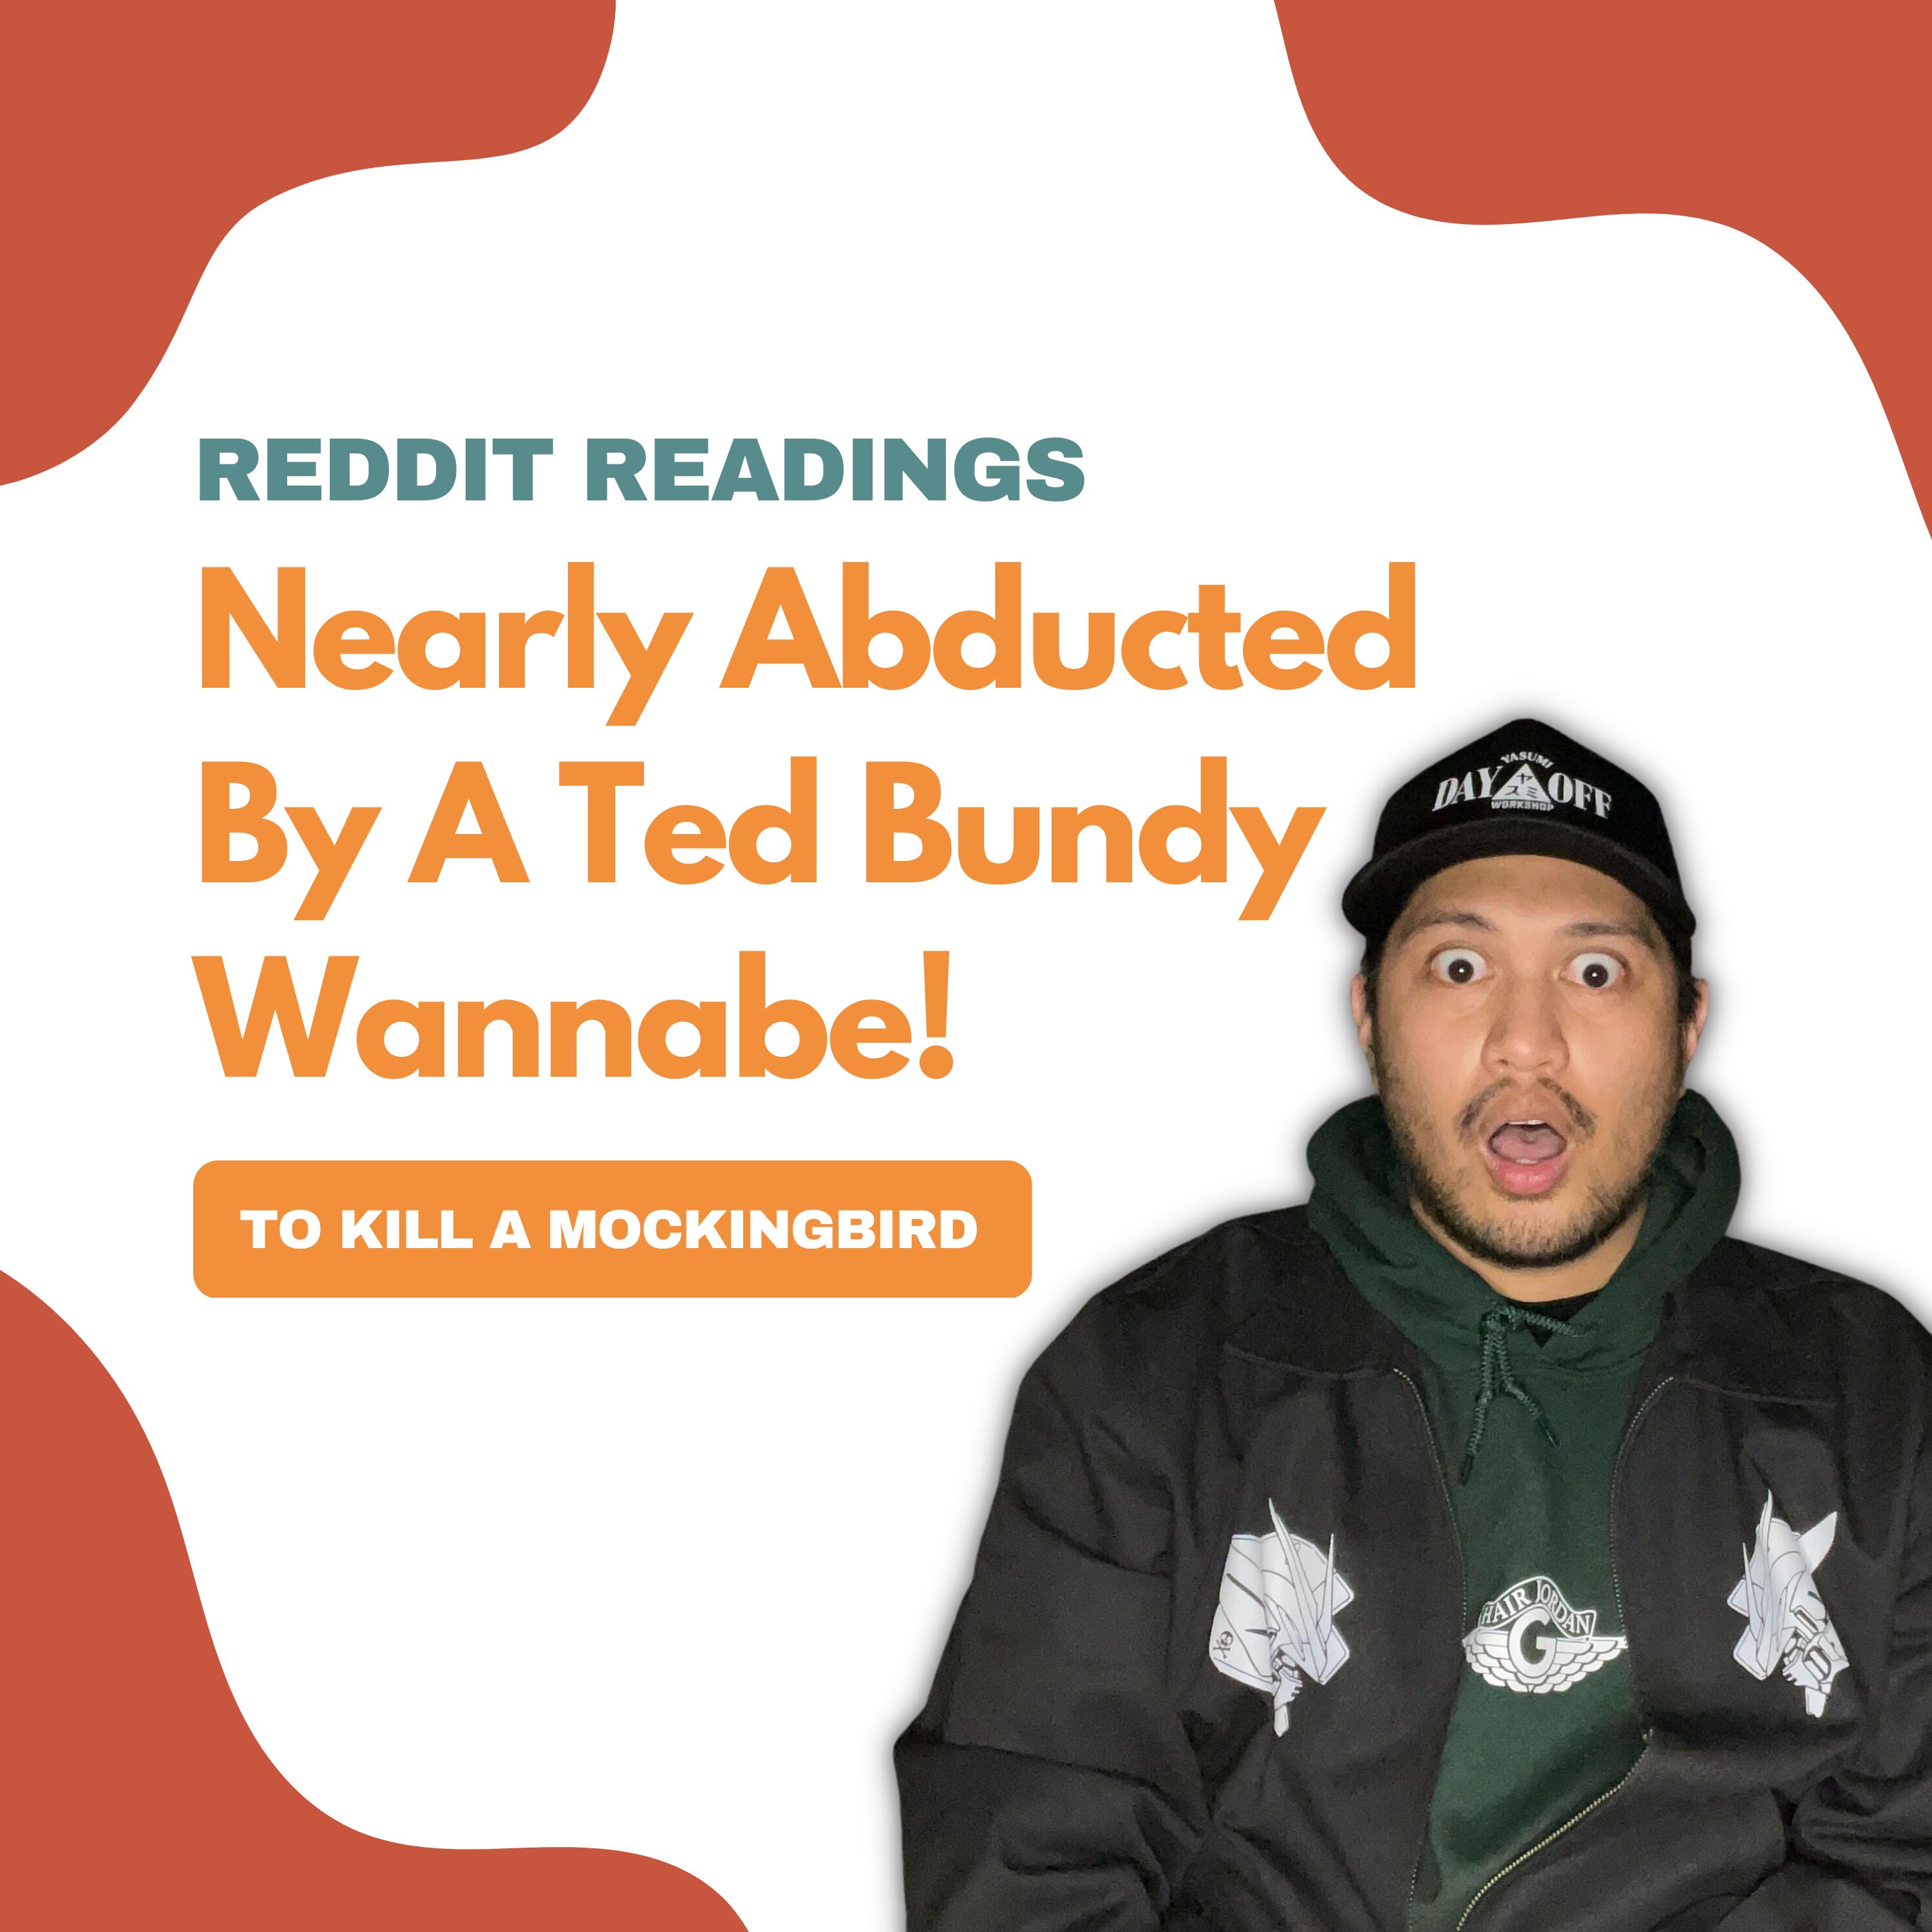 Reddit Readings | Nearly Abducted By A Ted Bundy Wannabe!